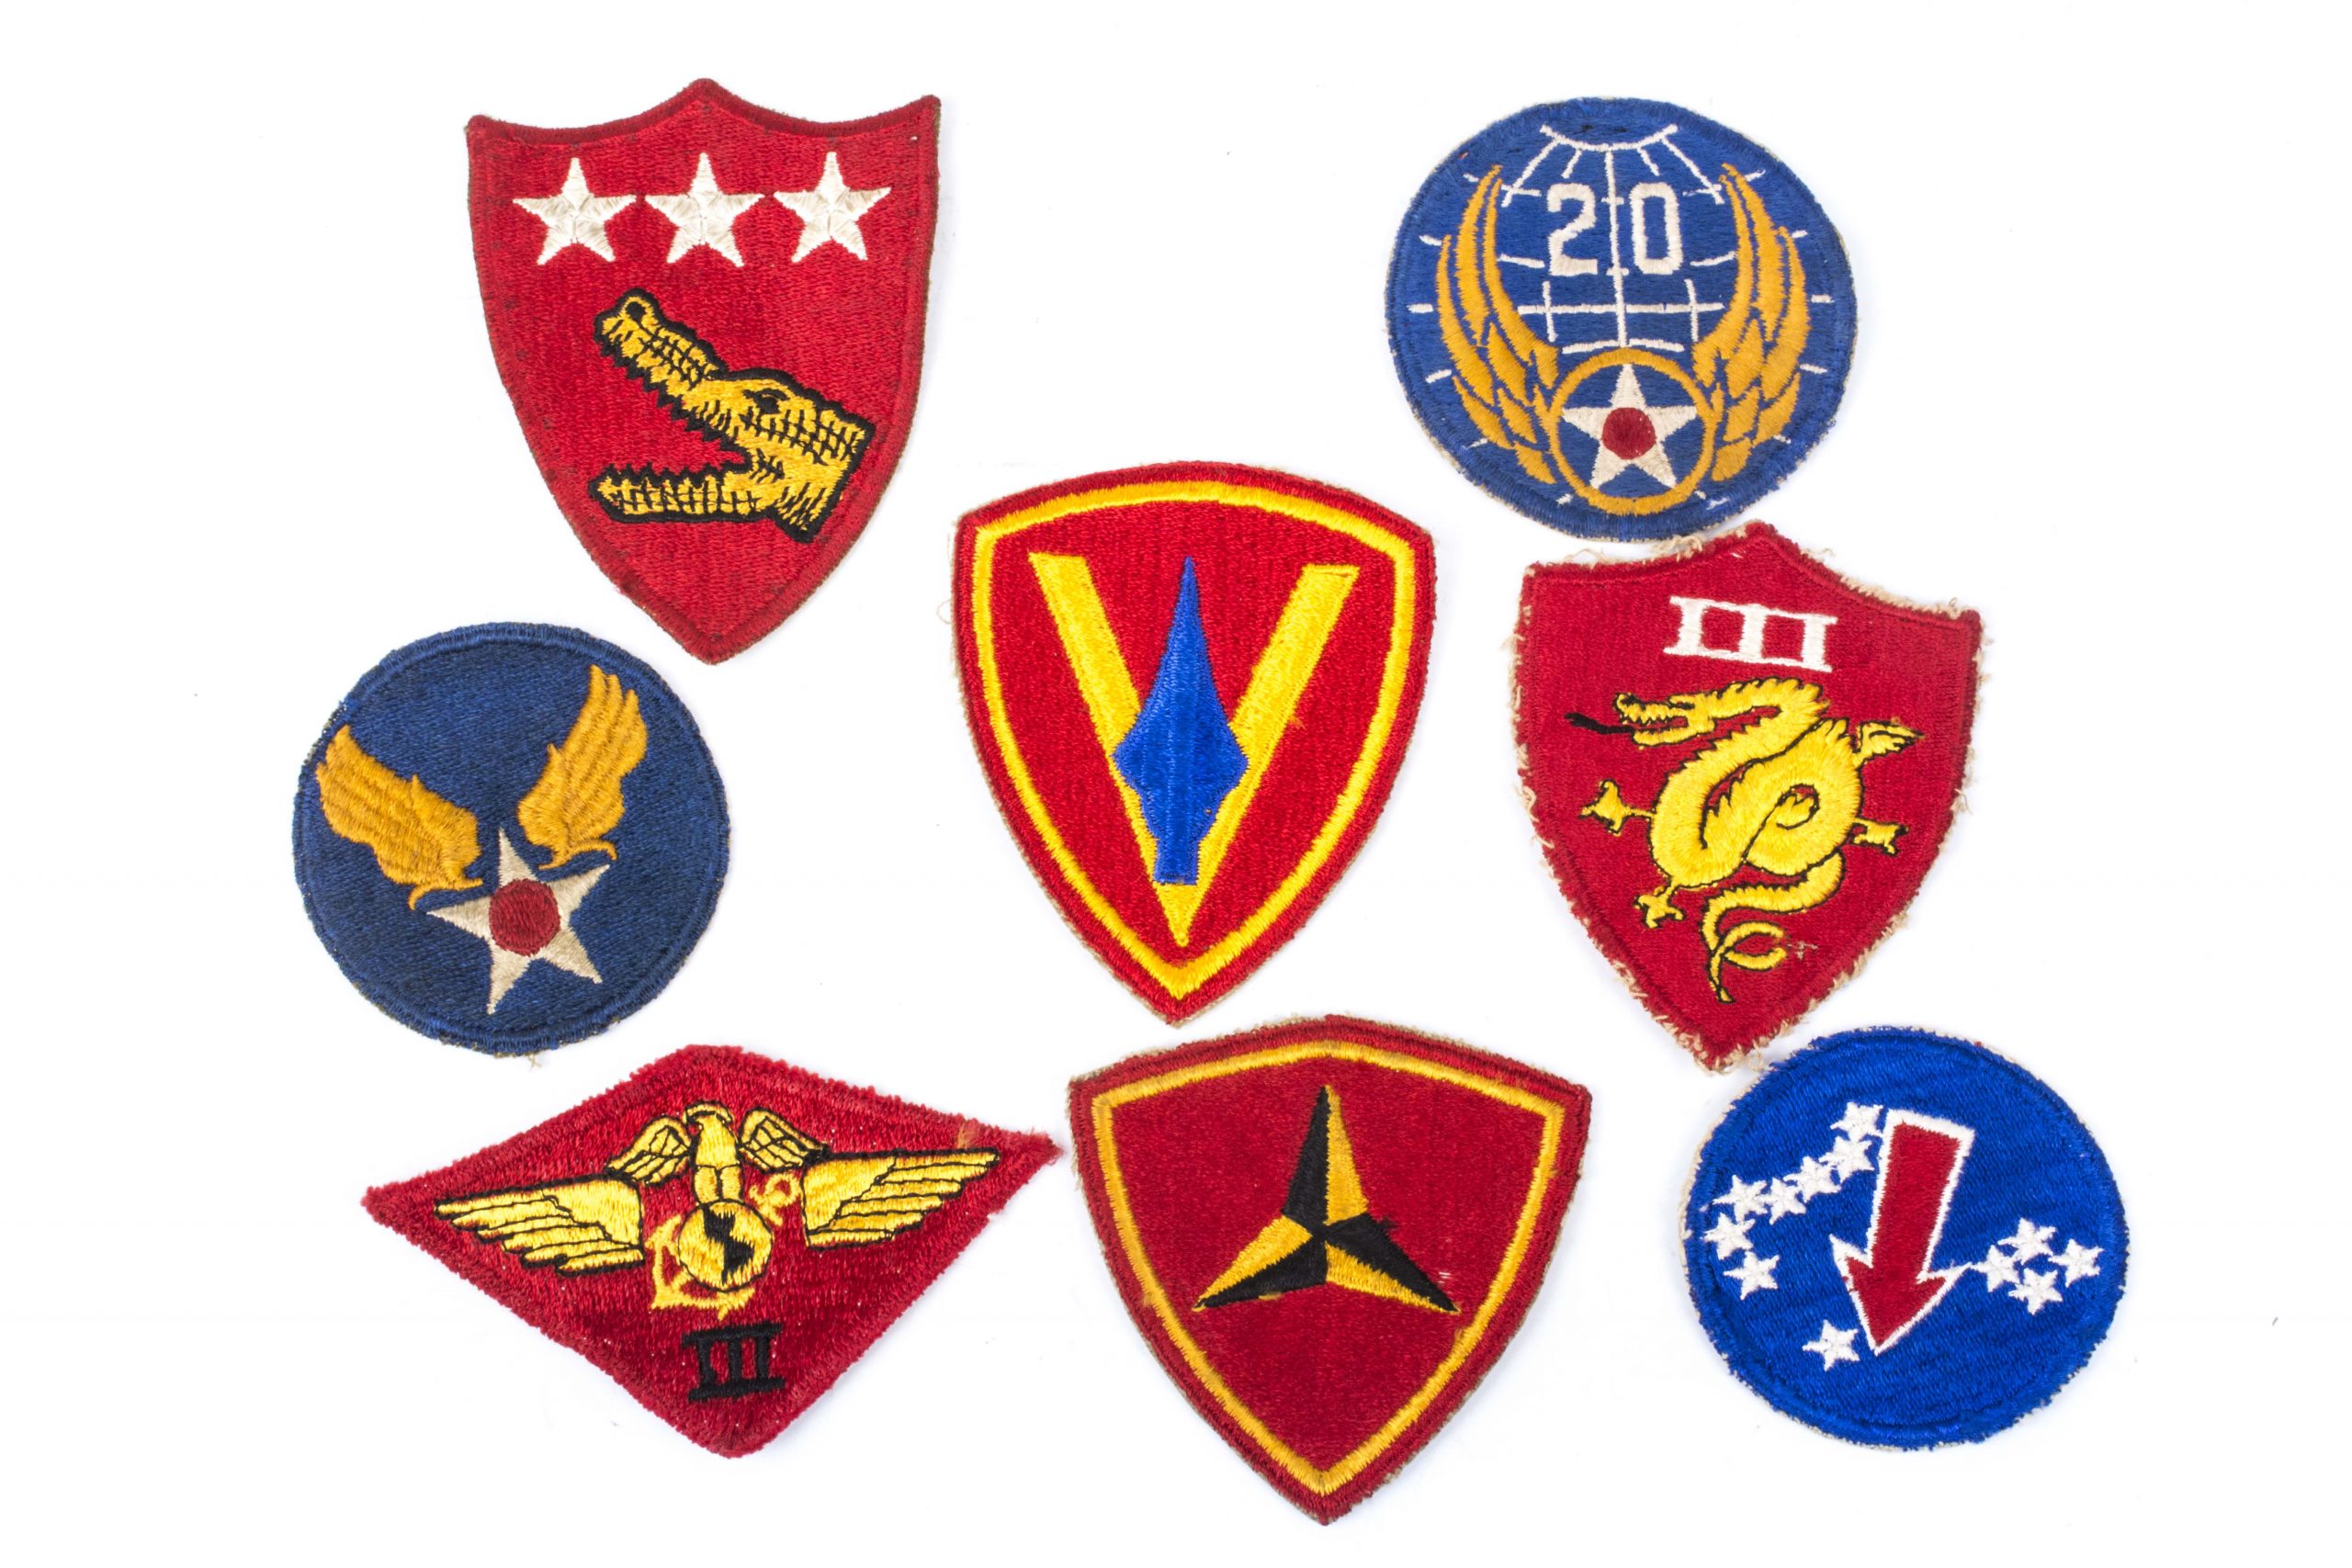 Grouping of 7 PTO US Army patches